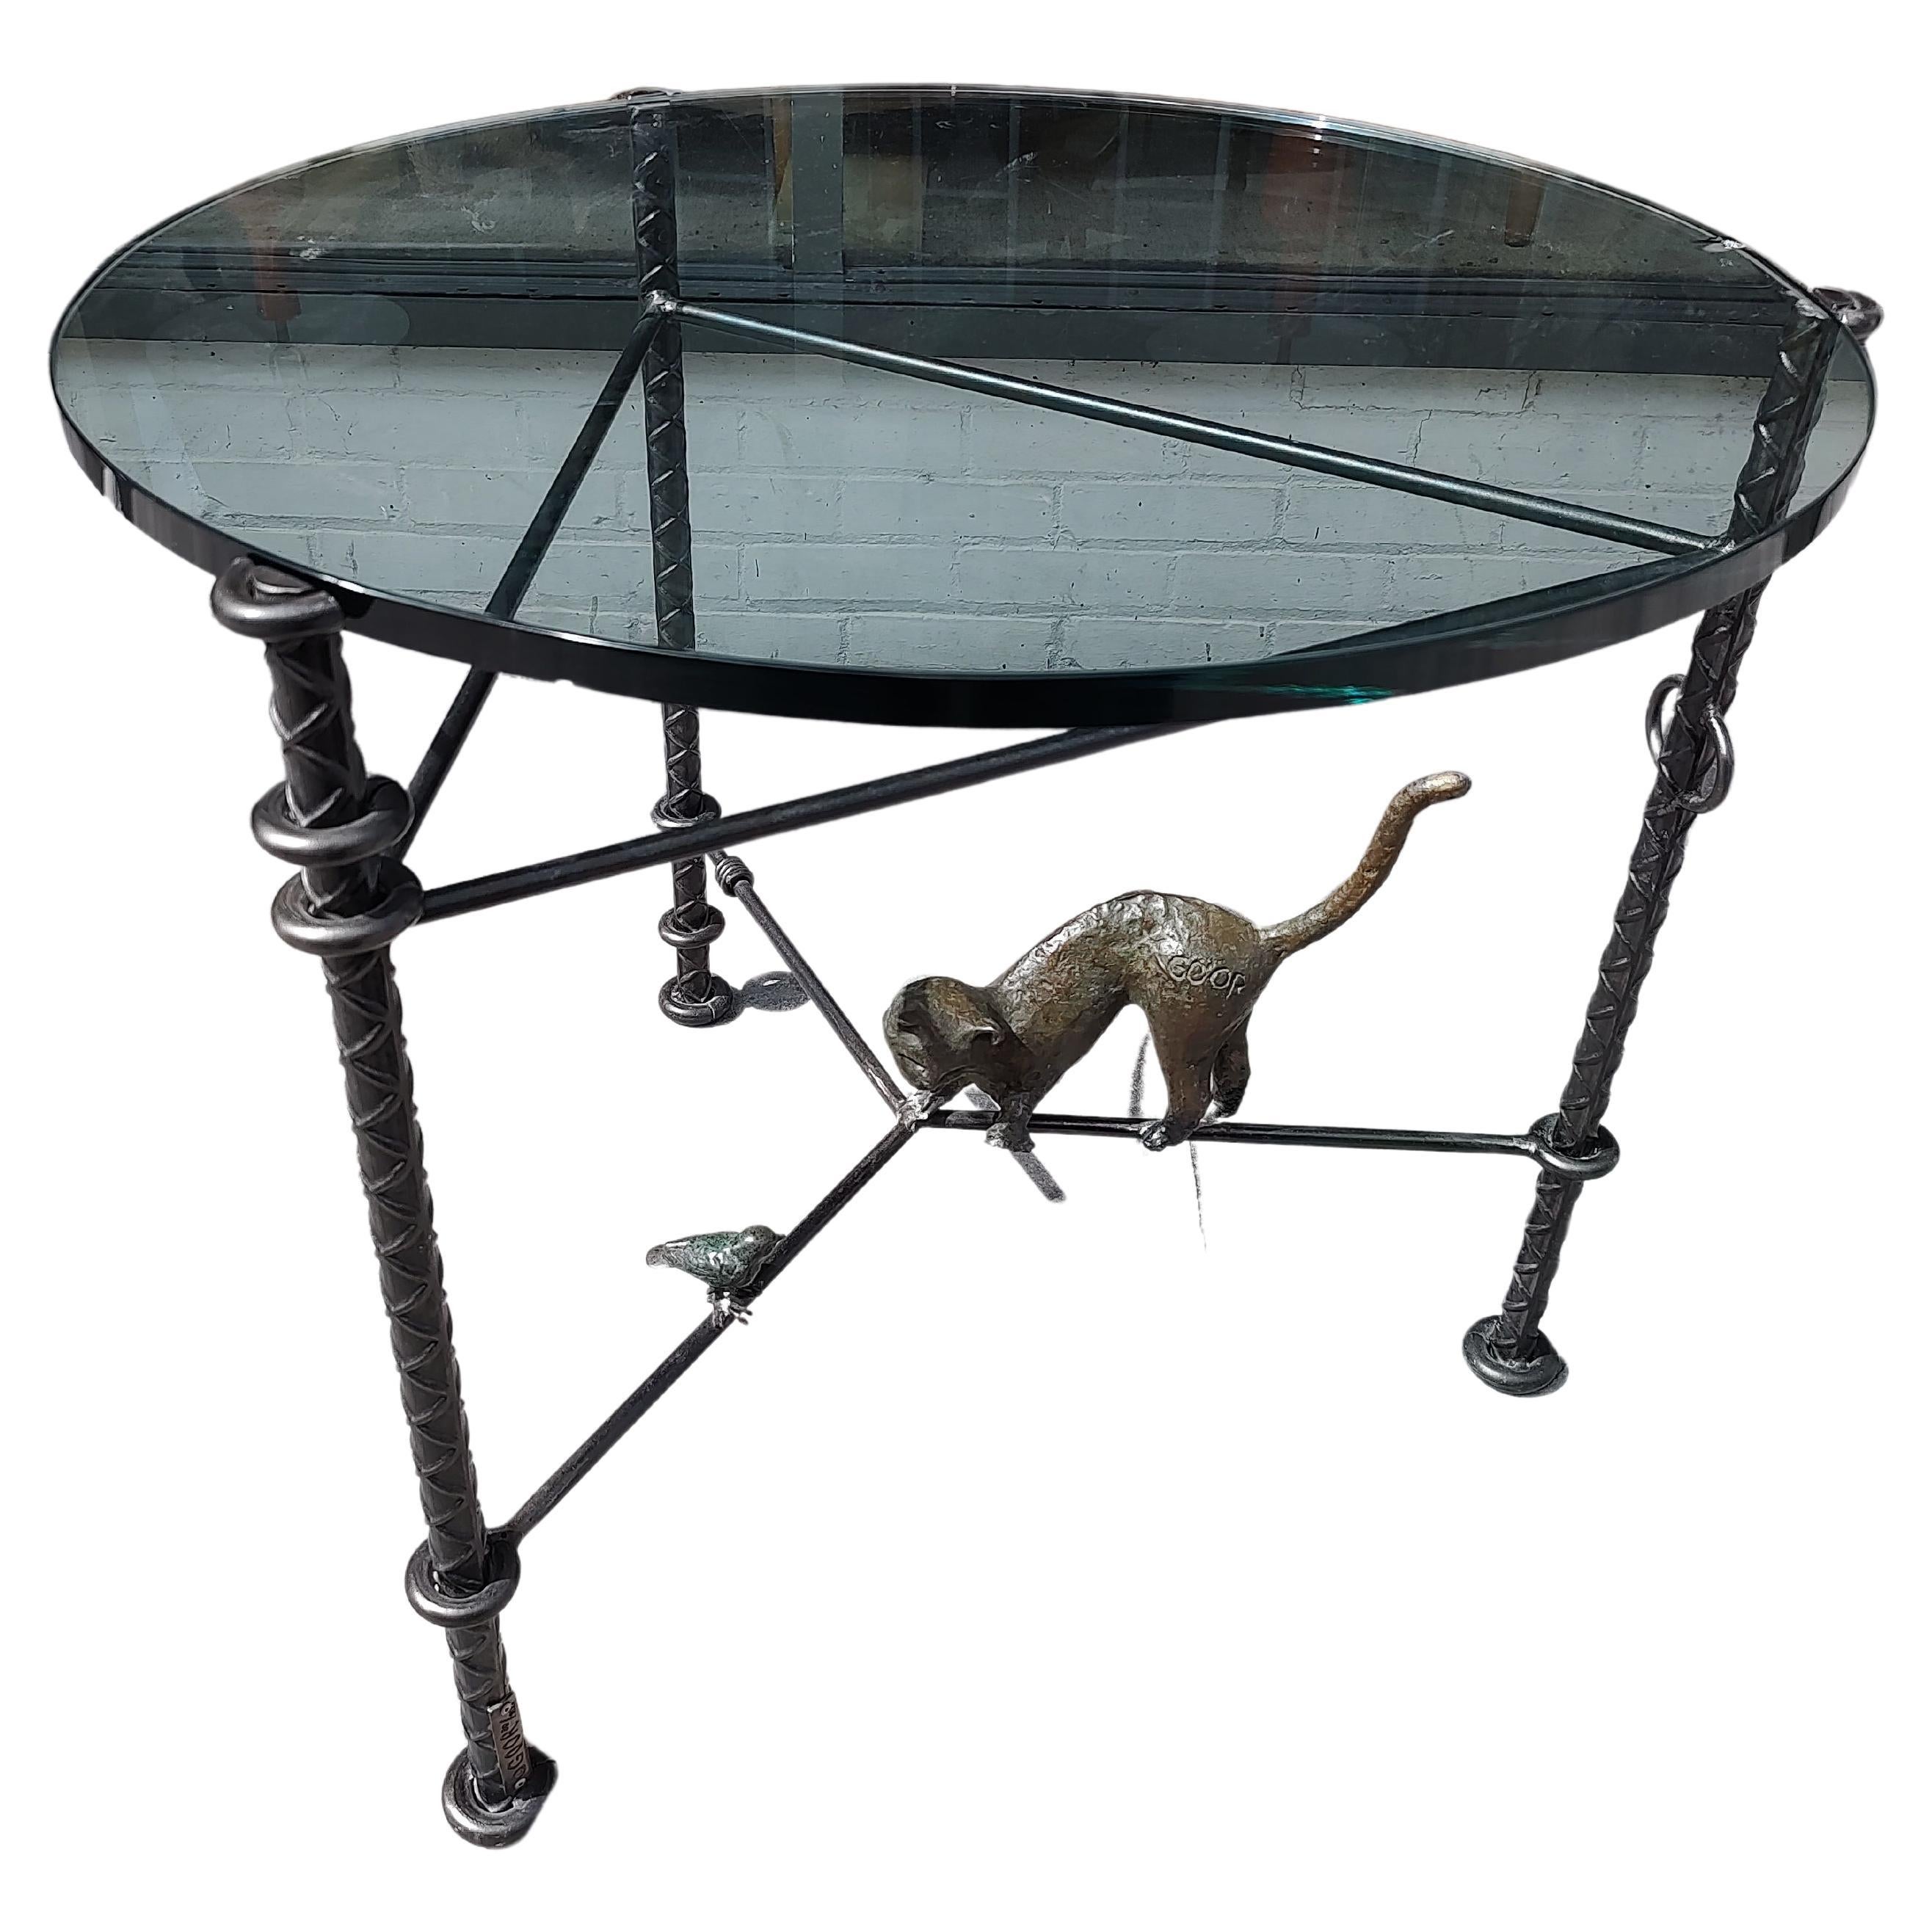 Llana Goor Israel Bronze Mid Century Table with Cat & Bird Dimensional Glass Top In Good Condition For Sale In Port Jervis, NY